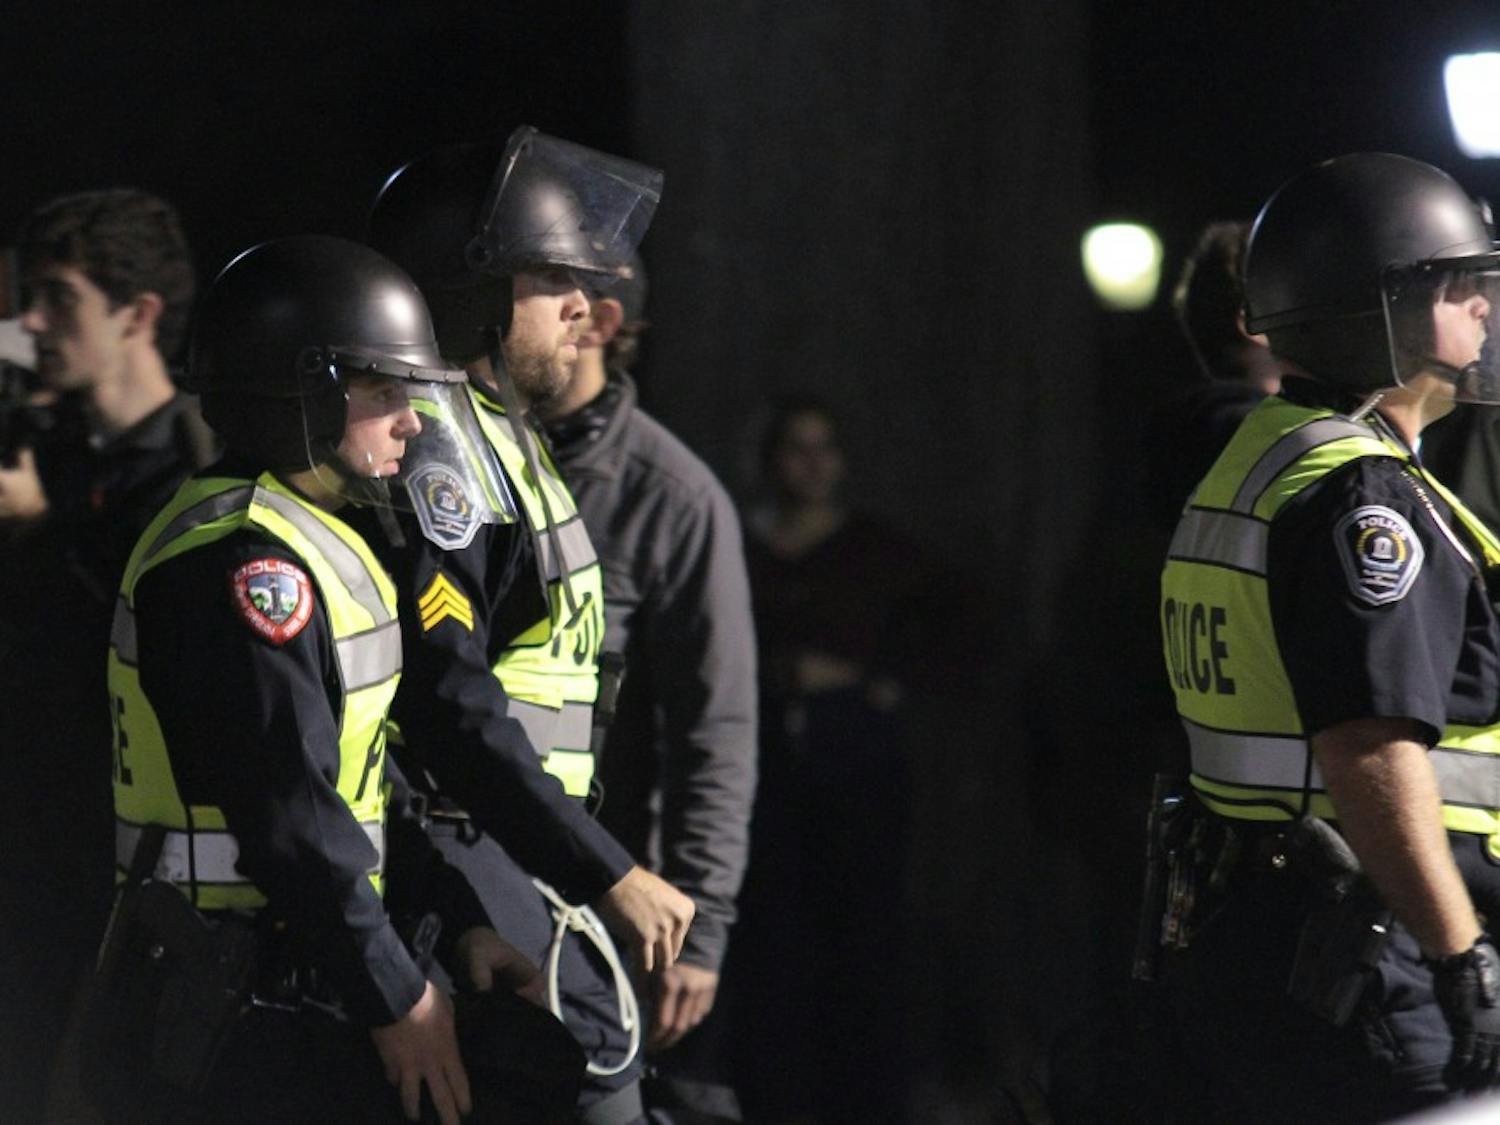 Police officers put on riot gear during the demonstration against the decision to place Silent Sam in a new historic building on campus on Monday, Dec. 3, 2018.